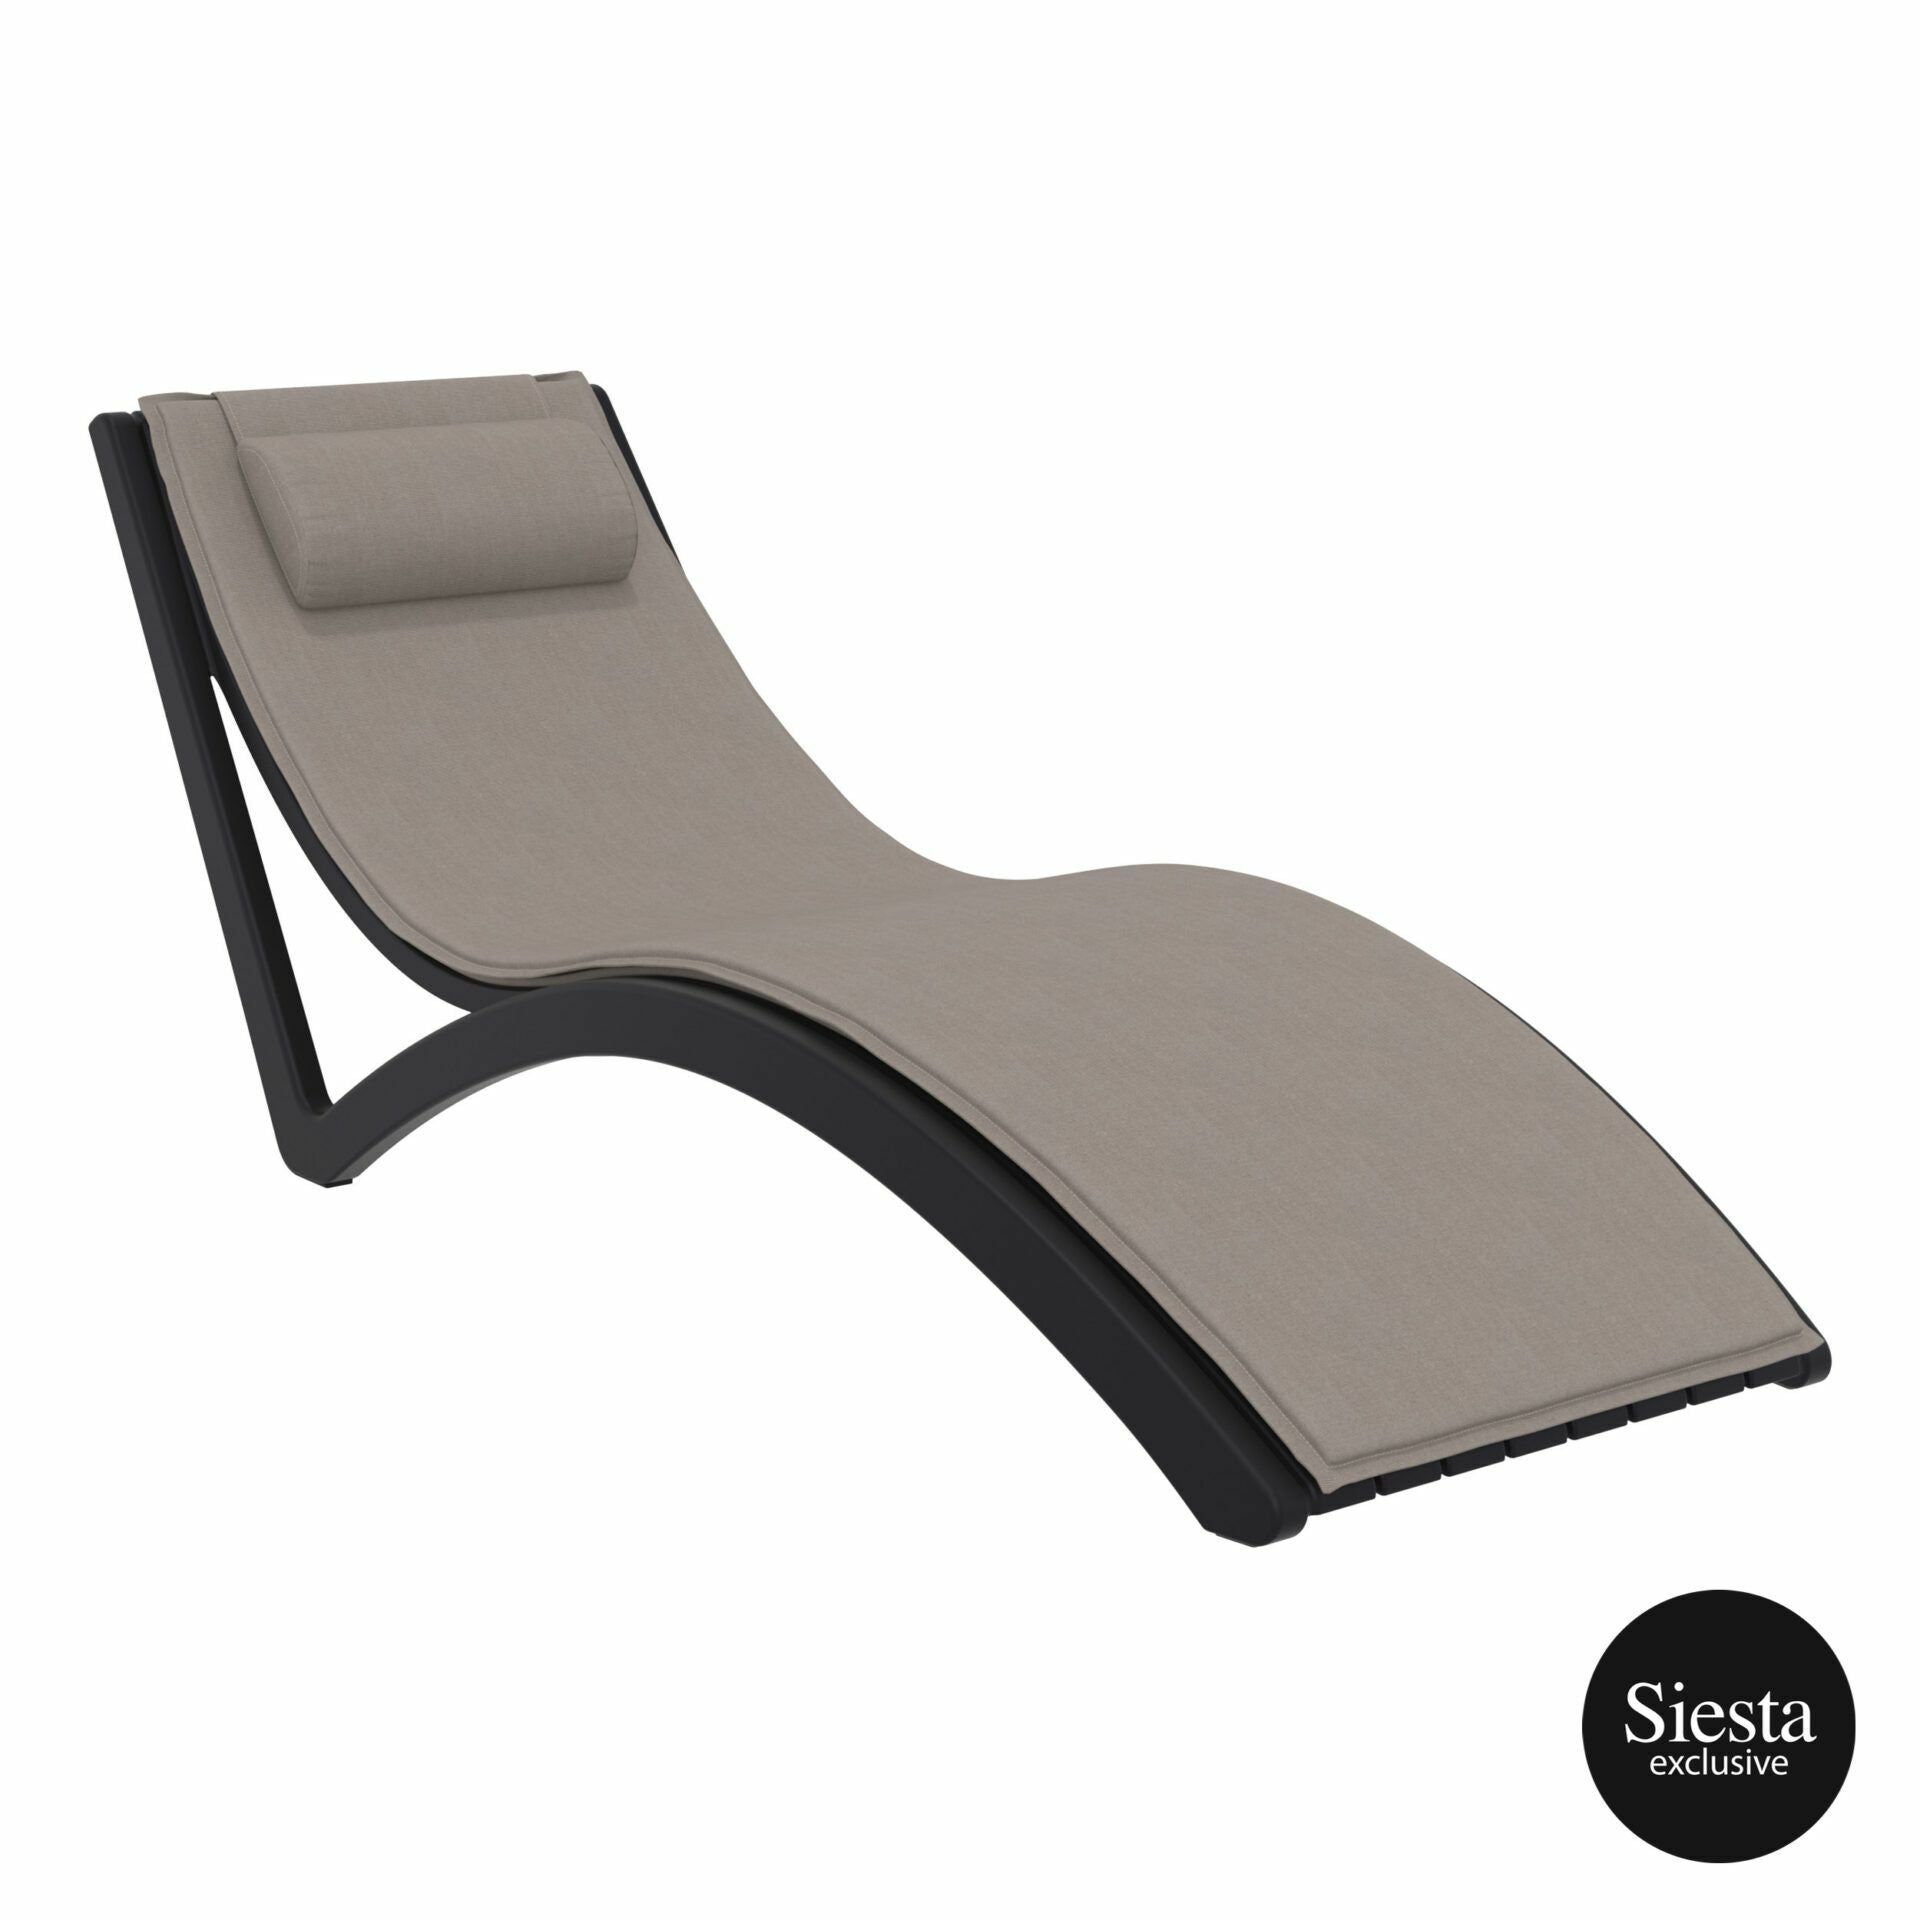 Pool Side 3 Piece Slim Sun Lounger Package with Ocean Side Table - Black with Taupe Cushion